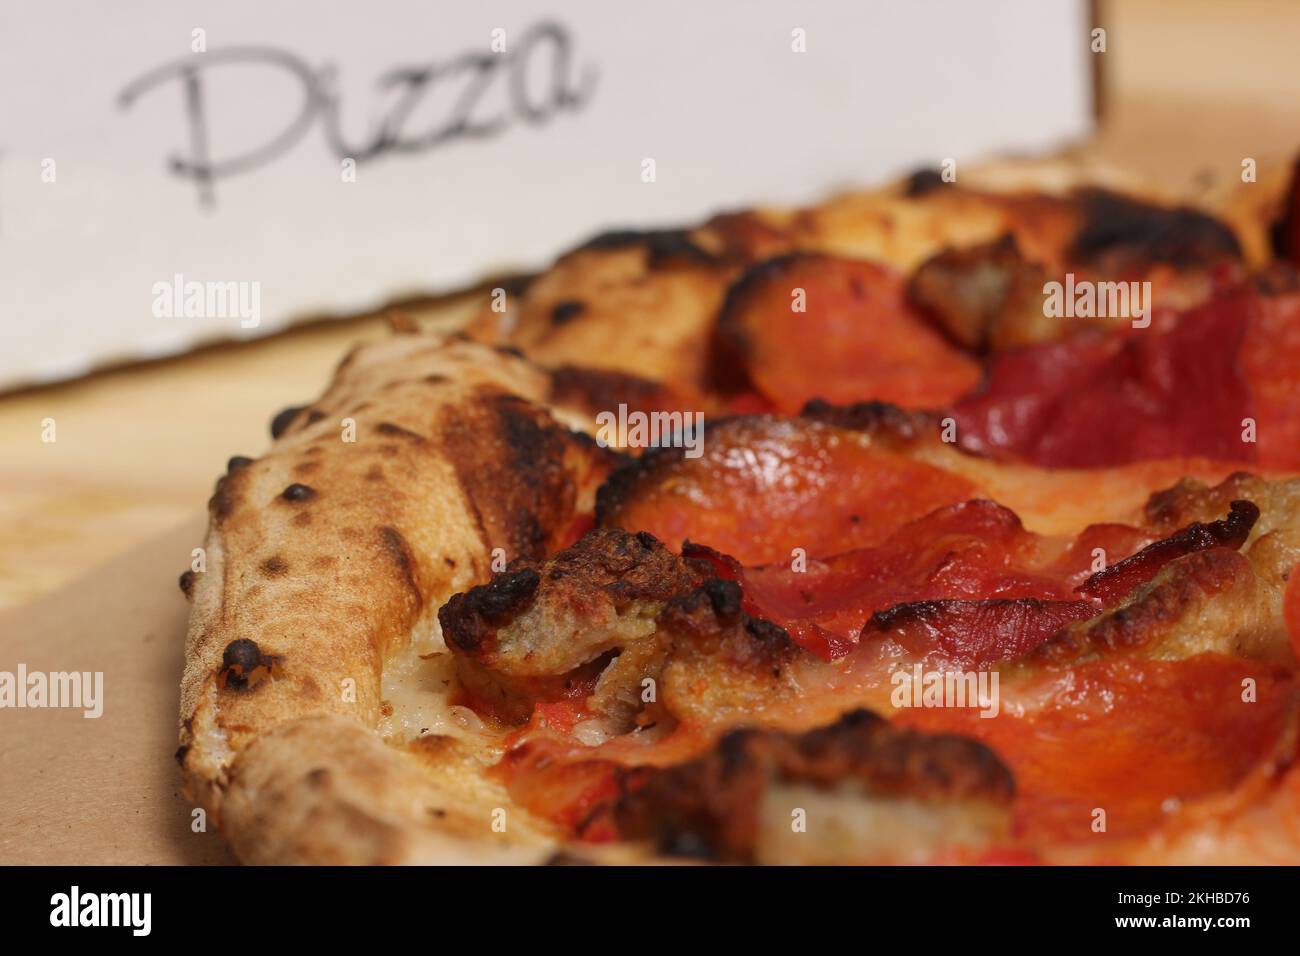 Fresh Pizza on Wooden Table at Restaurant Sliced and Ready to Enjoy Stock Photo